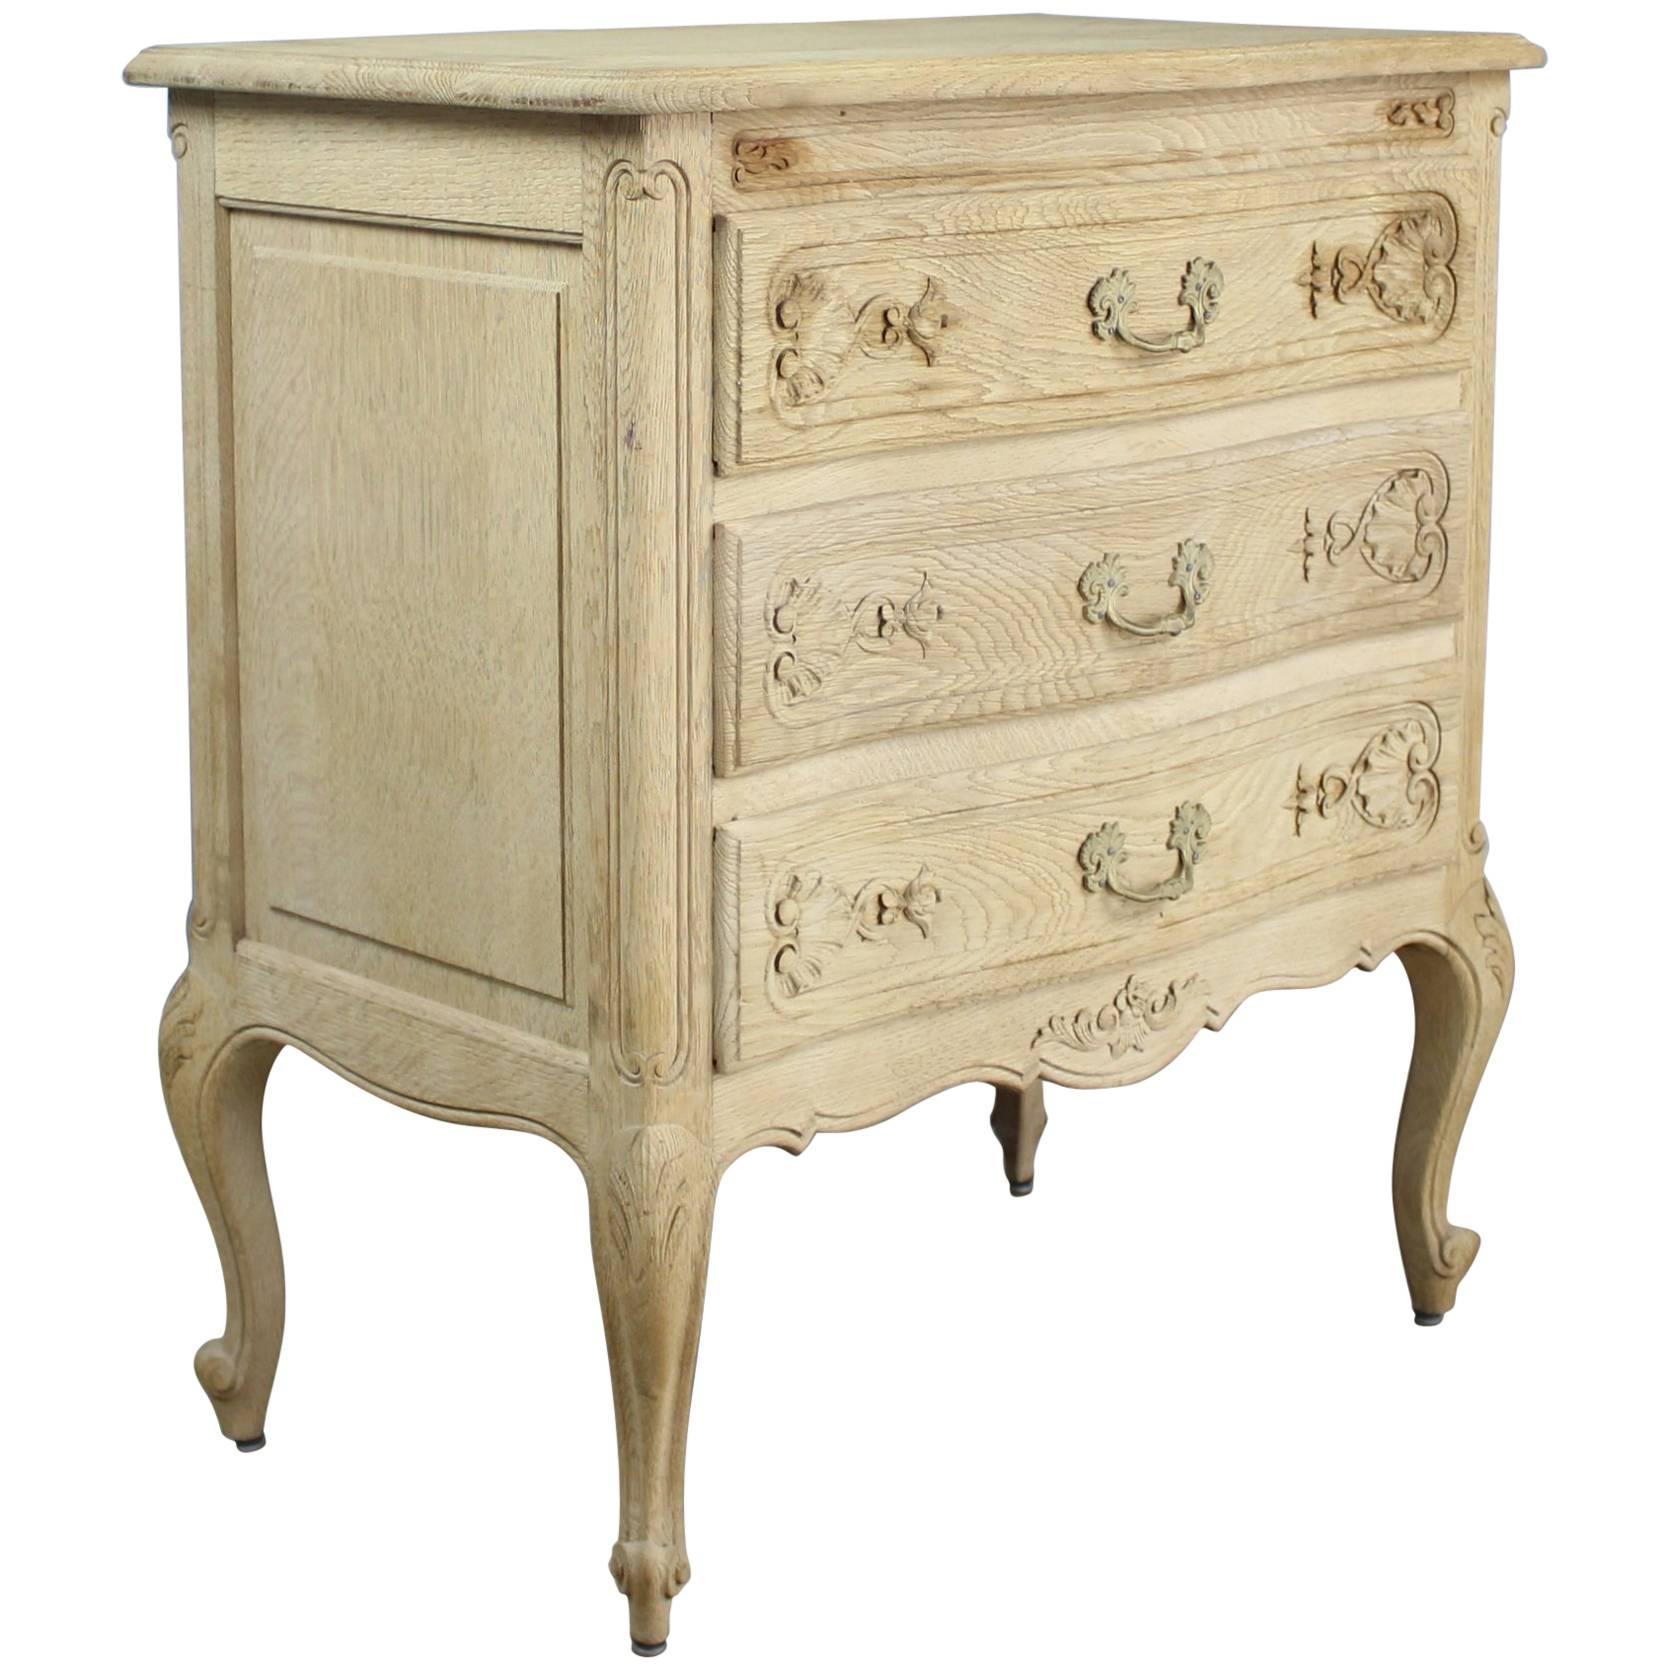 Small Antique Bleached Oak Commode, Fancifully Carved